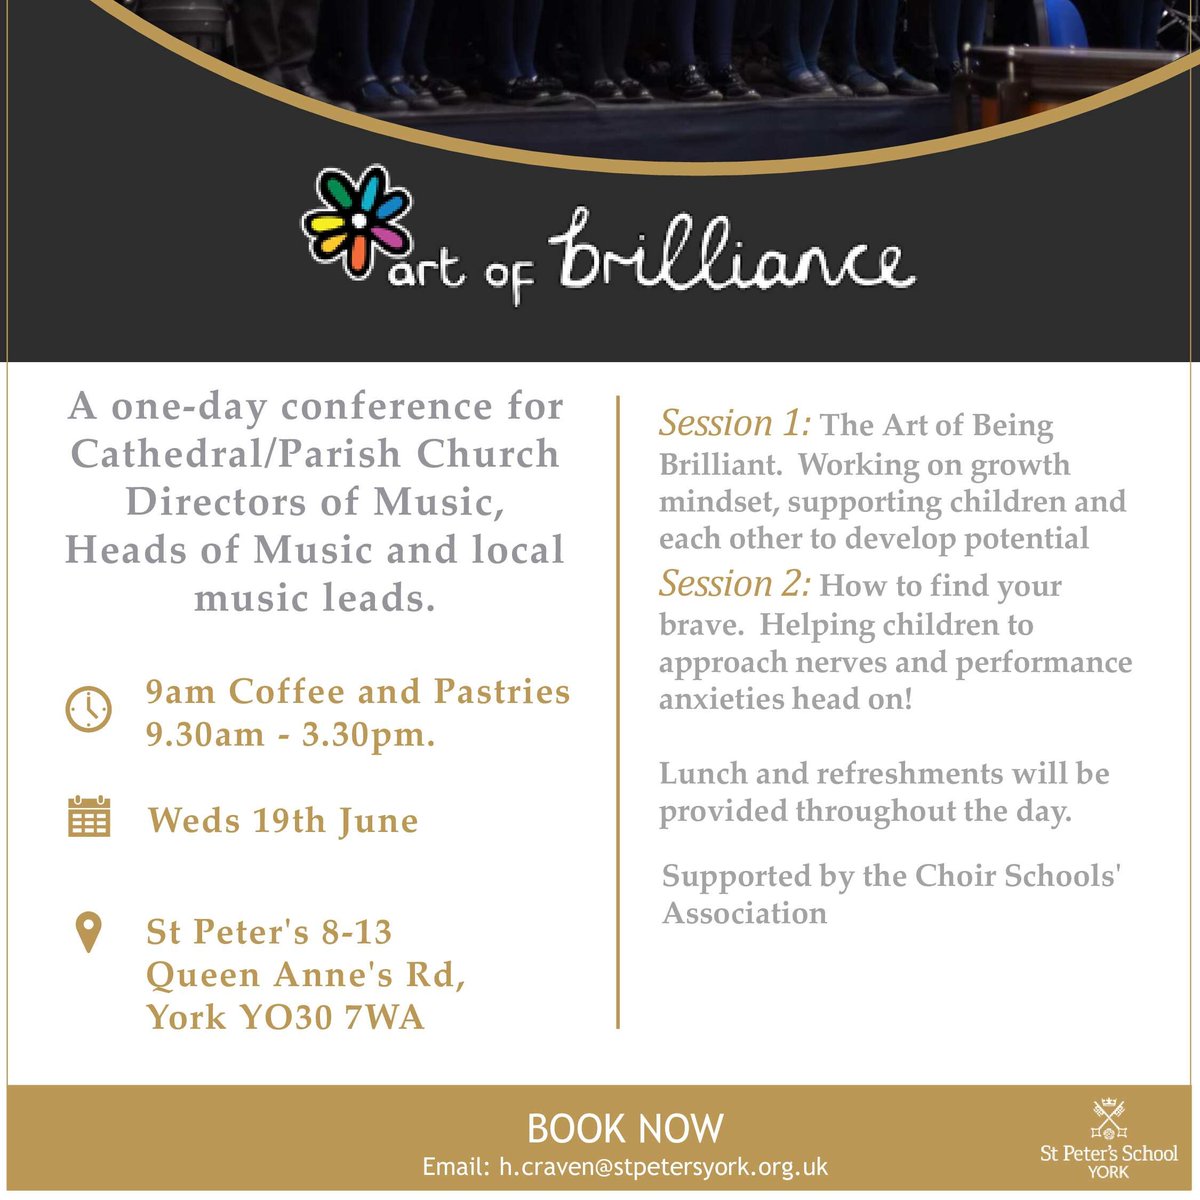 So excited to be hosting this conference with Art of Brilliance @beingbrilliant on 19th June - all about growth mindset and supporting musicians. If you are interested, please get in touch - it will be amazing. So grateful to @CSAChoir for their generous support.